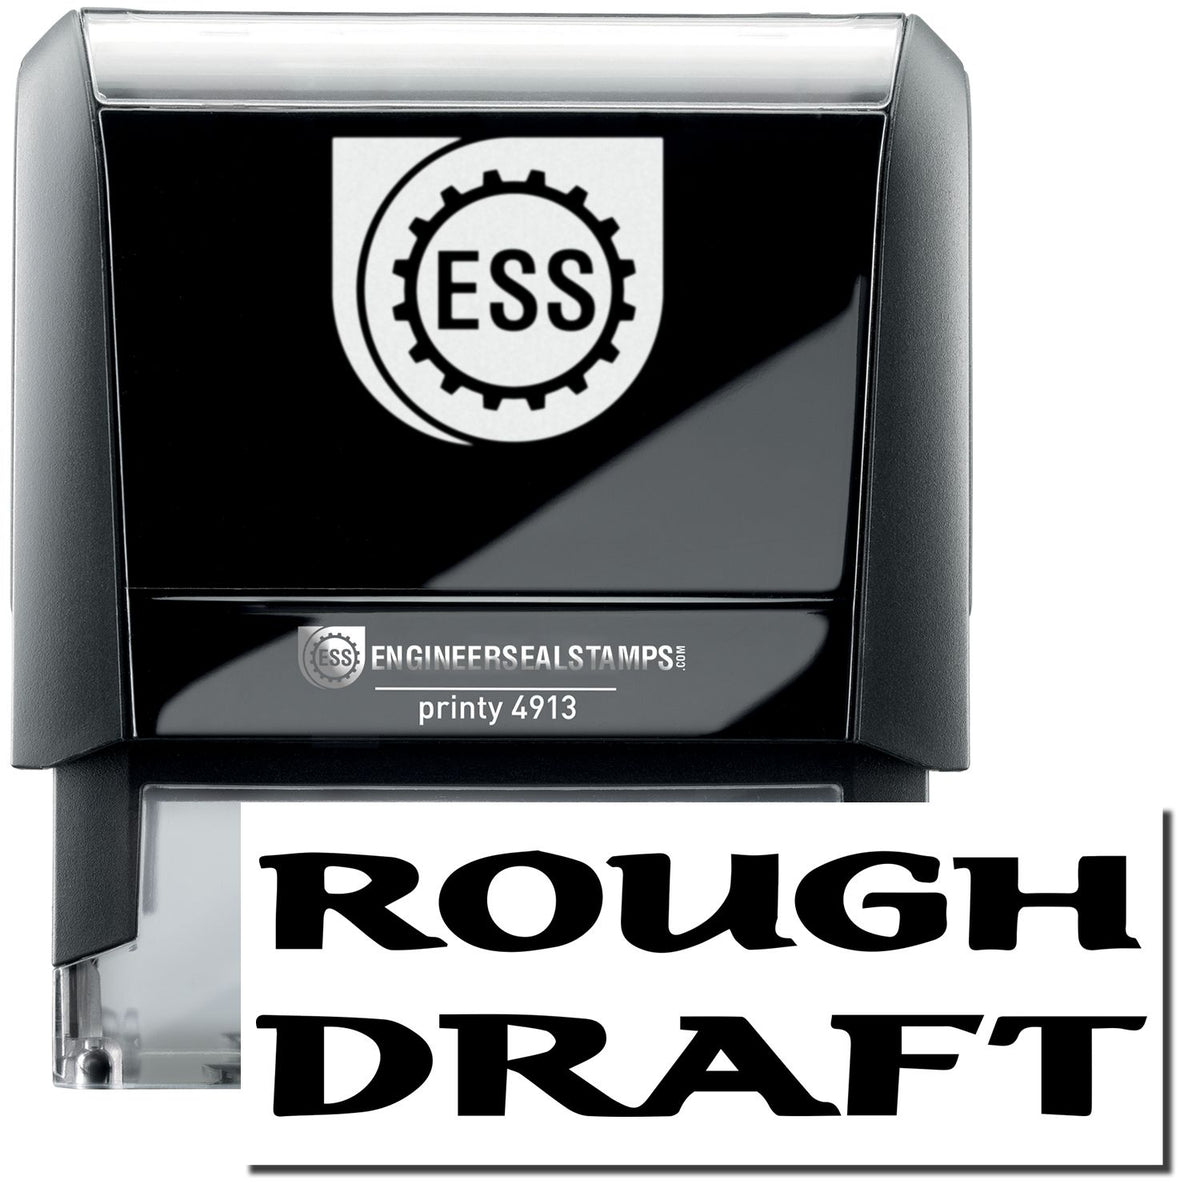 A self-inking stamp with a stamped image showing how the text &quot;ROUGH DRAFT&quot; in a large bold font is displayed by it after stamping.